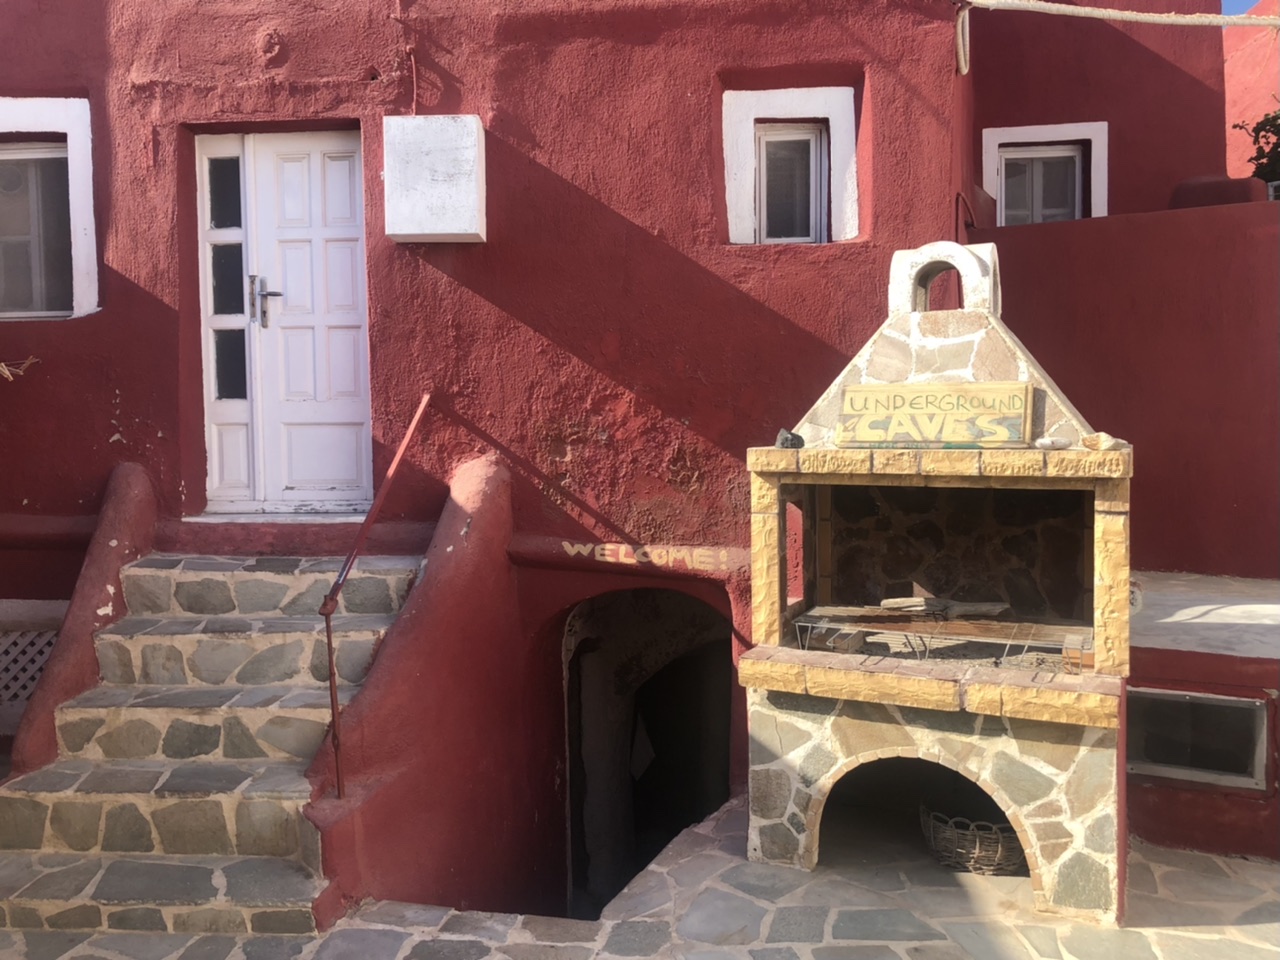 Red concrete building with three windows and stone steps leading up to white door. Outside there is an outdoor oven and signs saying "underground caves" and "welcome".